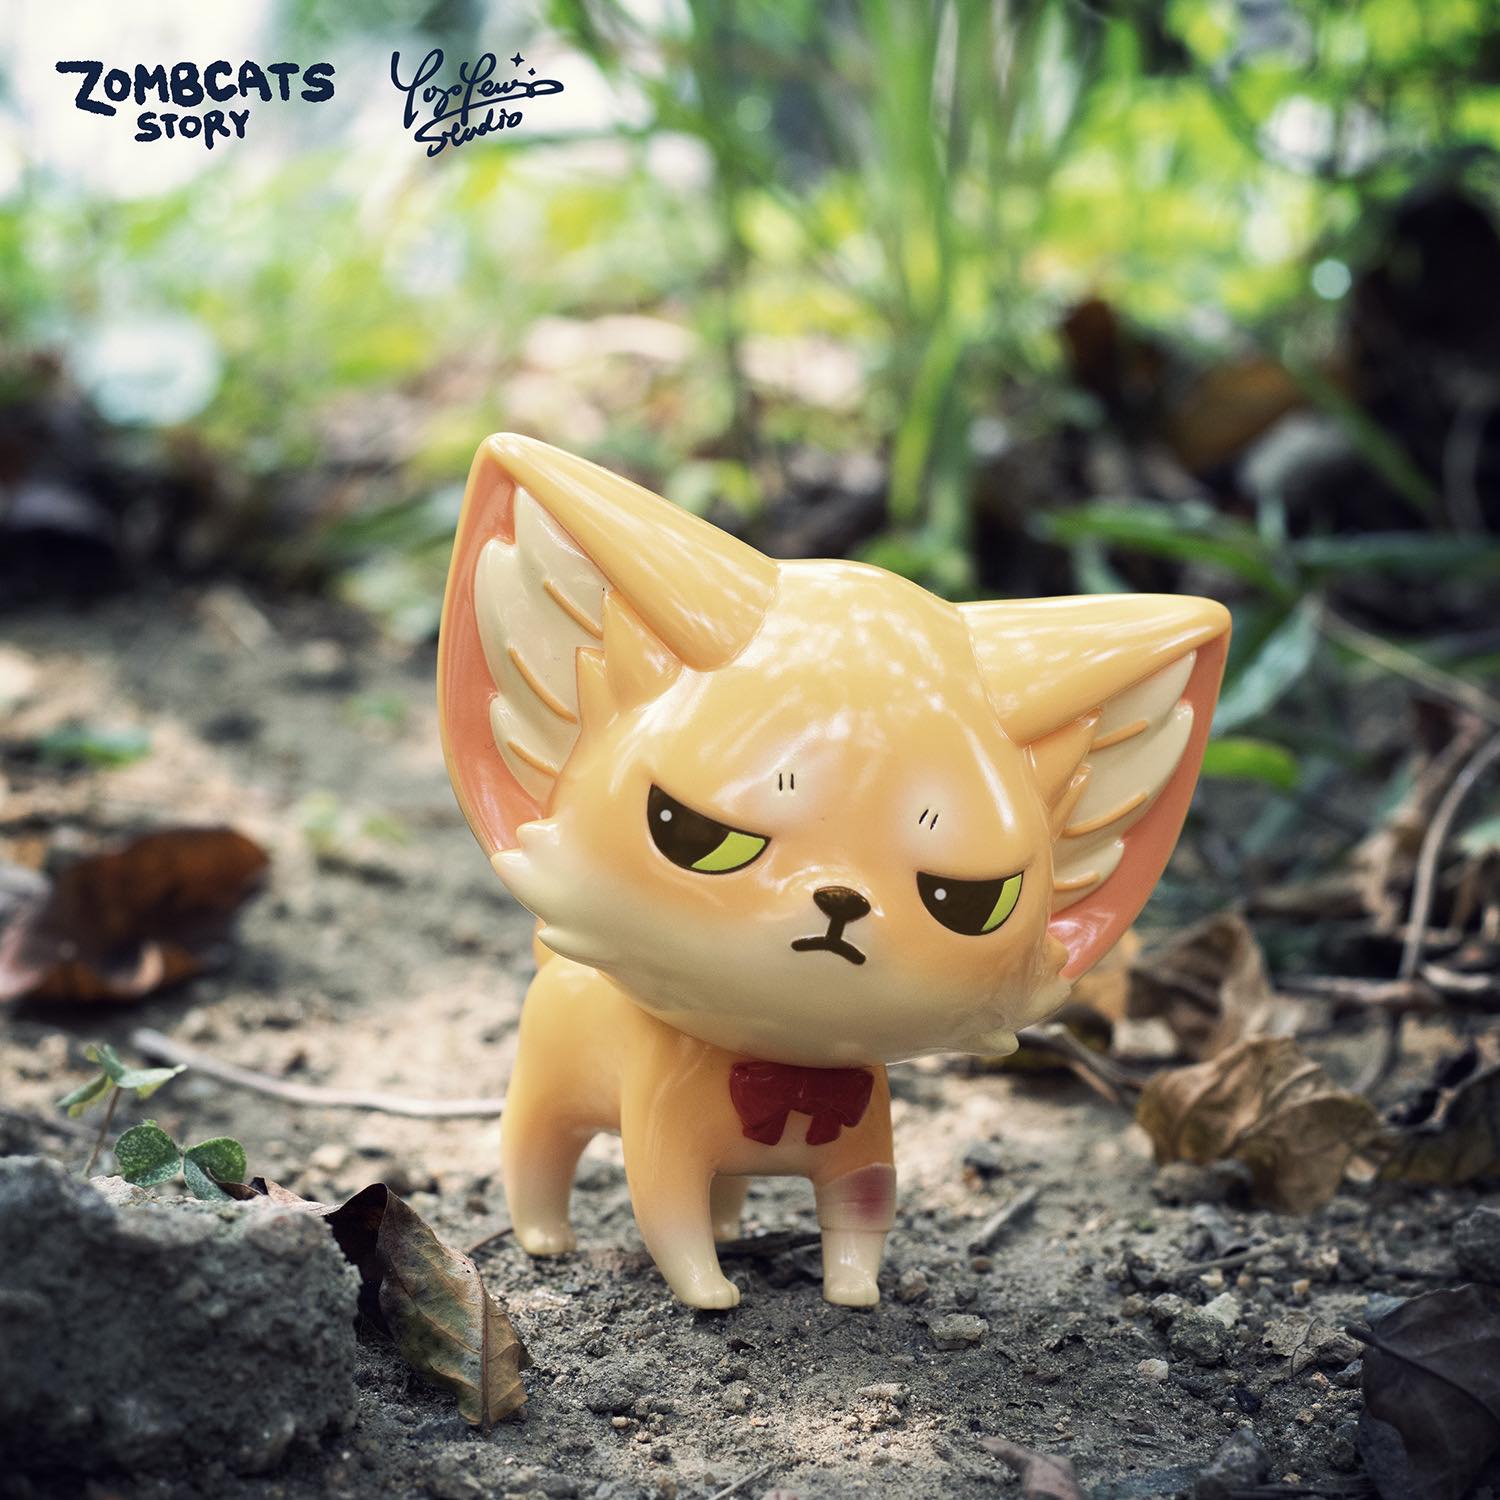 A limited edition Zombcat figurine by Morimei X Yoyo Yeung Studio, featuring Doomsday Fox Kenneth. Soft vinyl, 7cm, limited to 100pcs. Image shows toy animal on the ground.